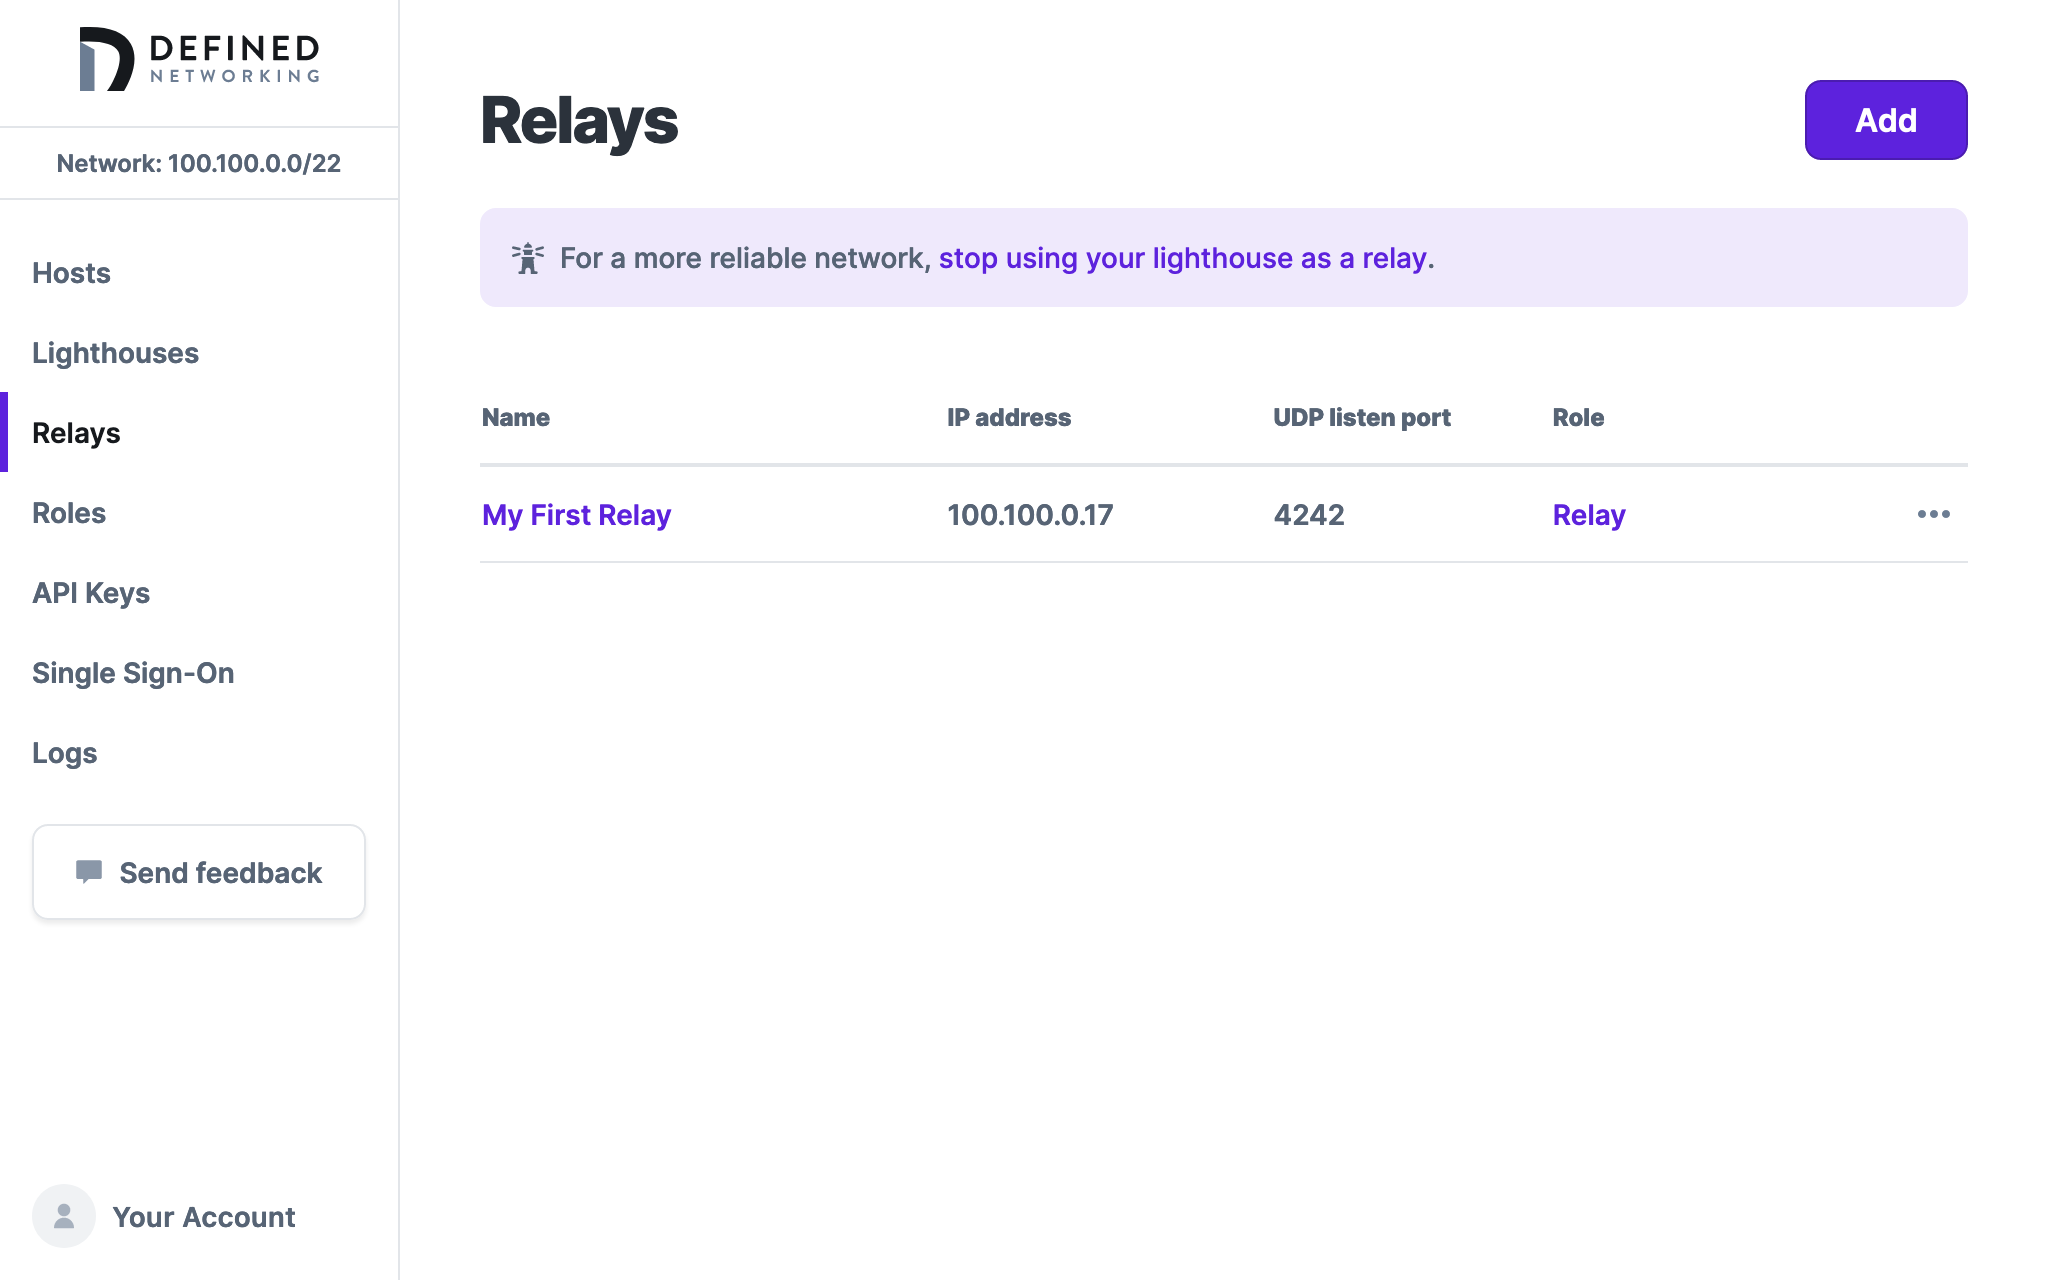 Relays page shows one relay called 'My First Relay' in the list, plus a banner than reads 'For a more reliable network, stop using your lighthouse as a relay'.